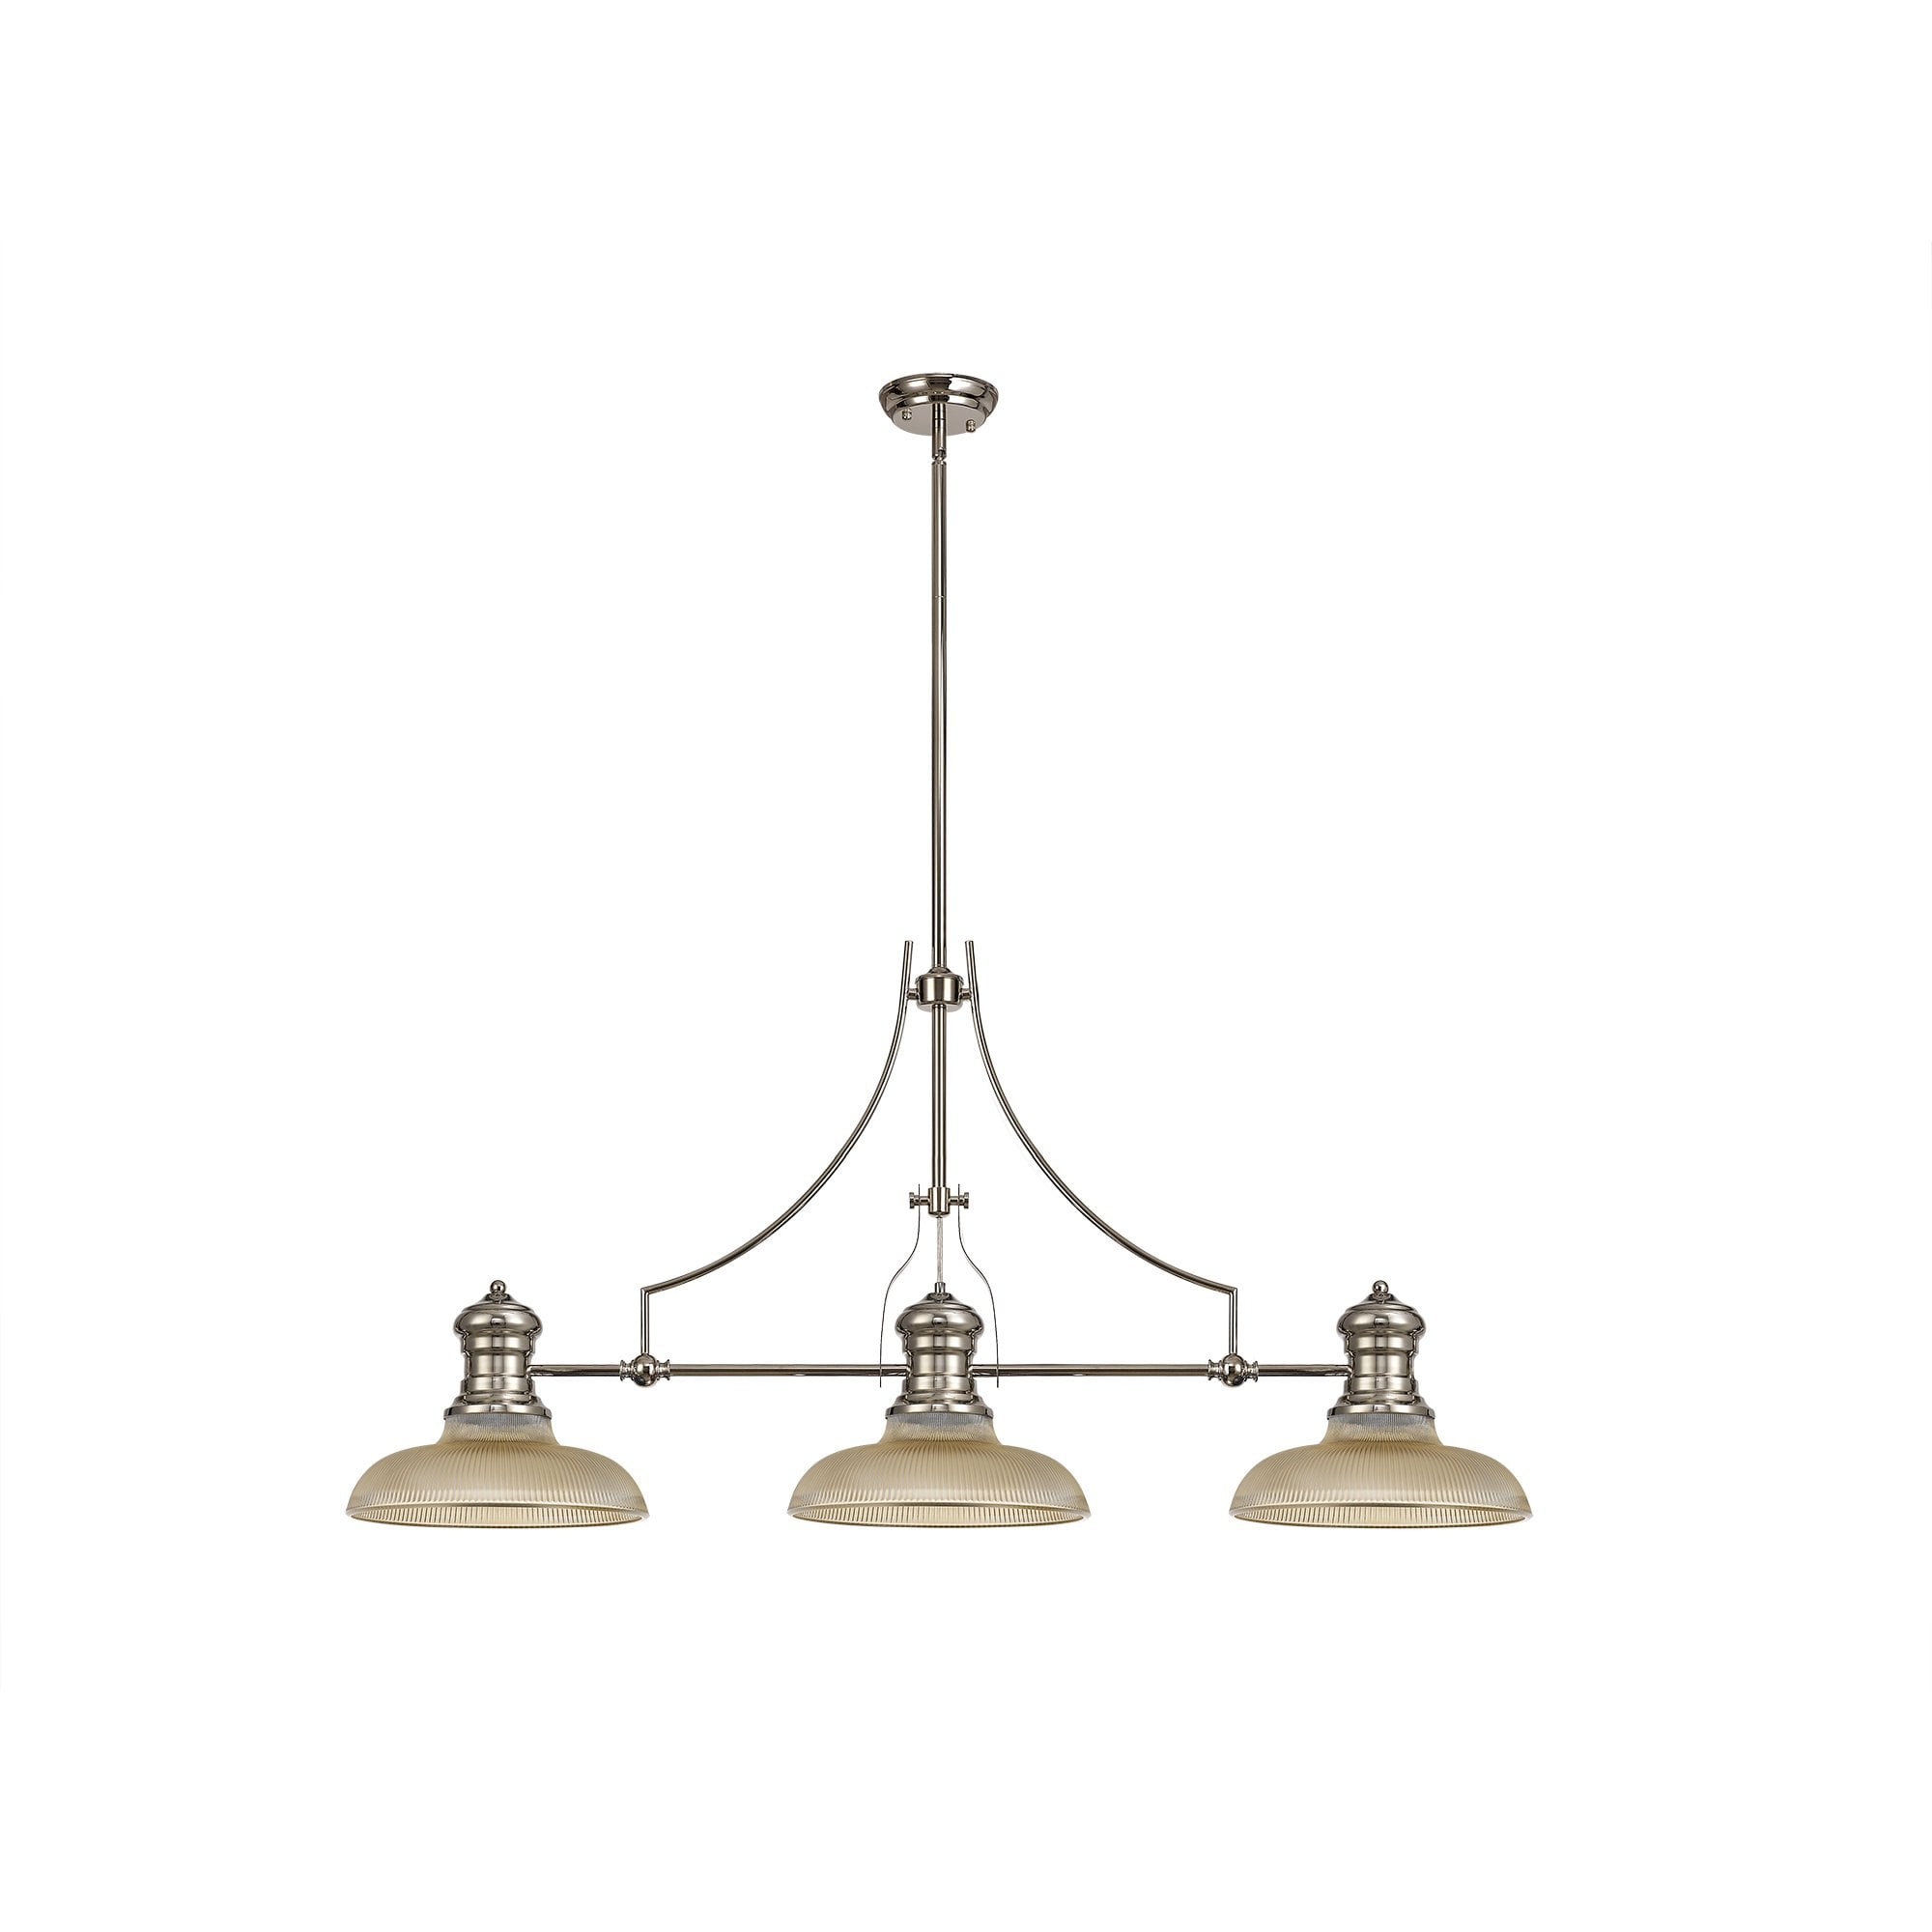 3 Light Telescopic Pendant E27 With 30cm Round Glass Shade, Polished Nickel/Amber